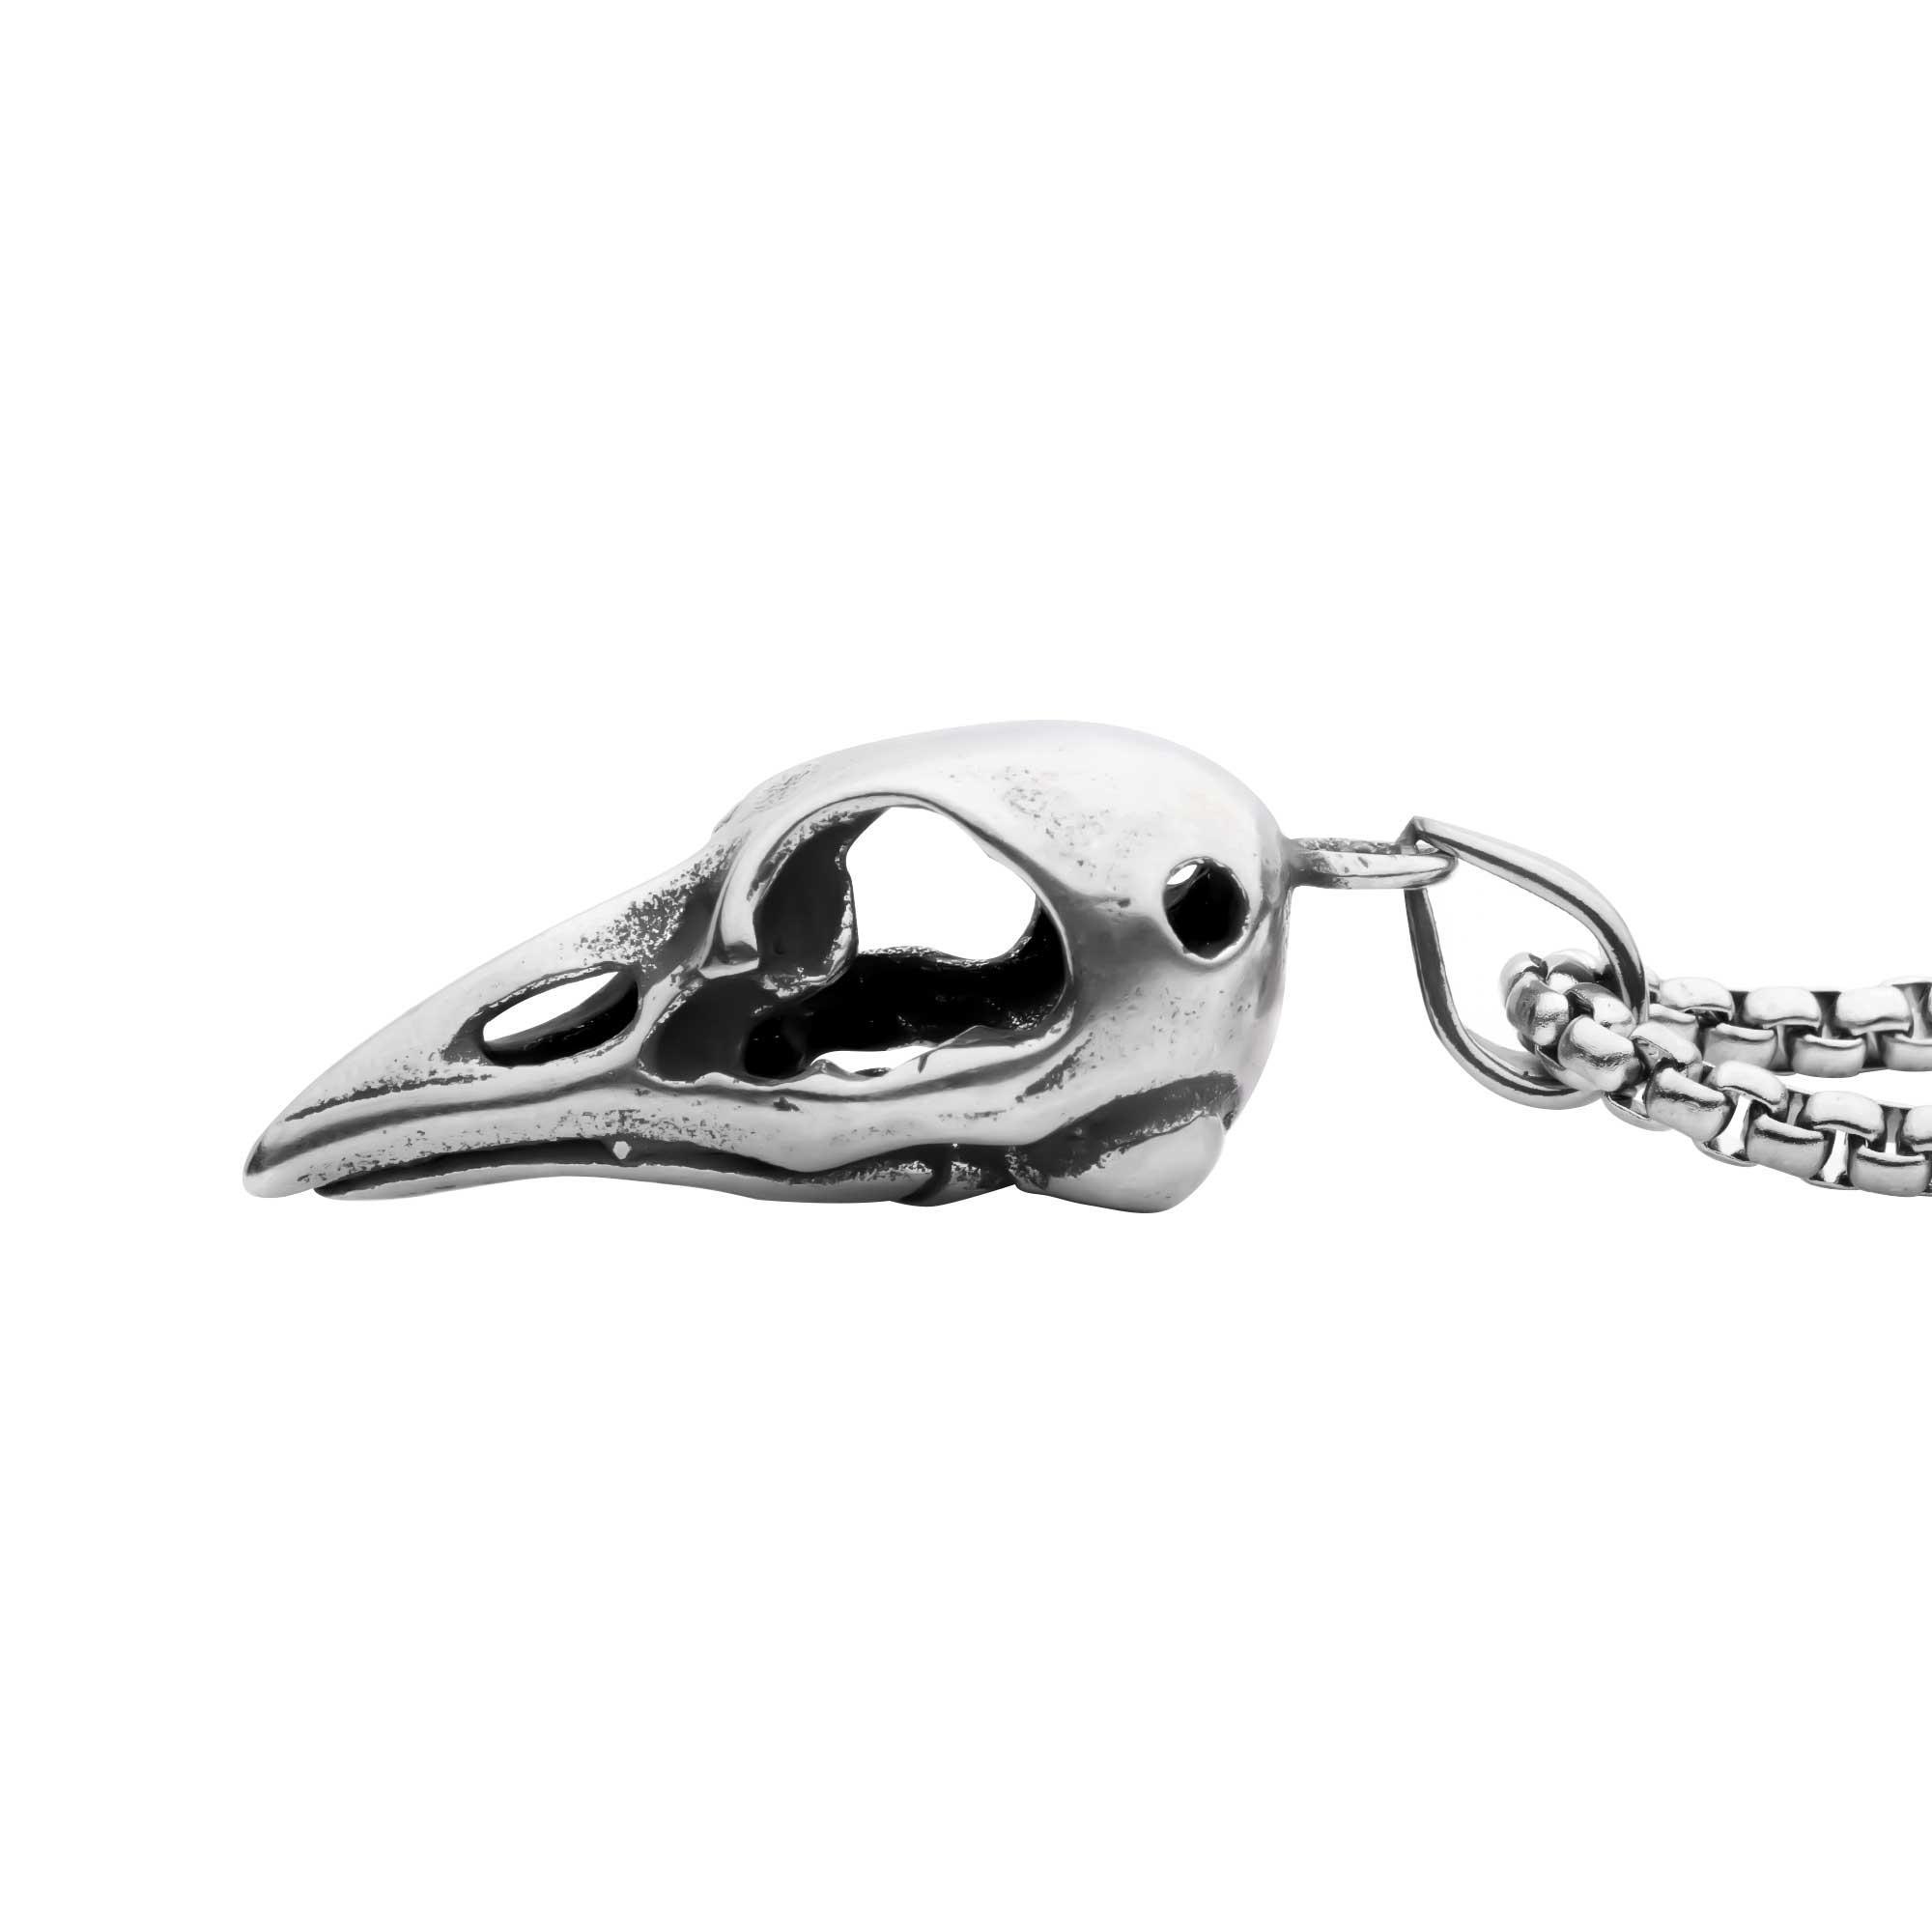 Distressed Matte Steel Crow Skull Pendant with Chain Image 3 Enchanted Jewelry Plainfield, CT